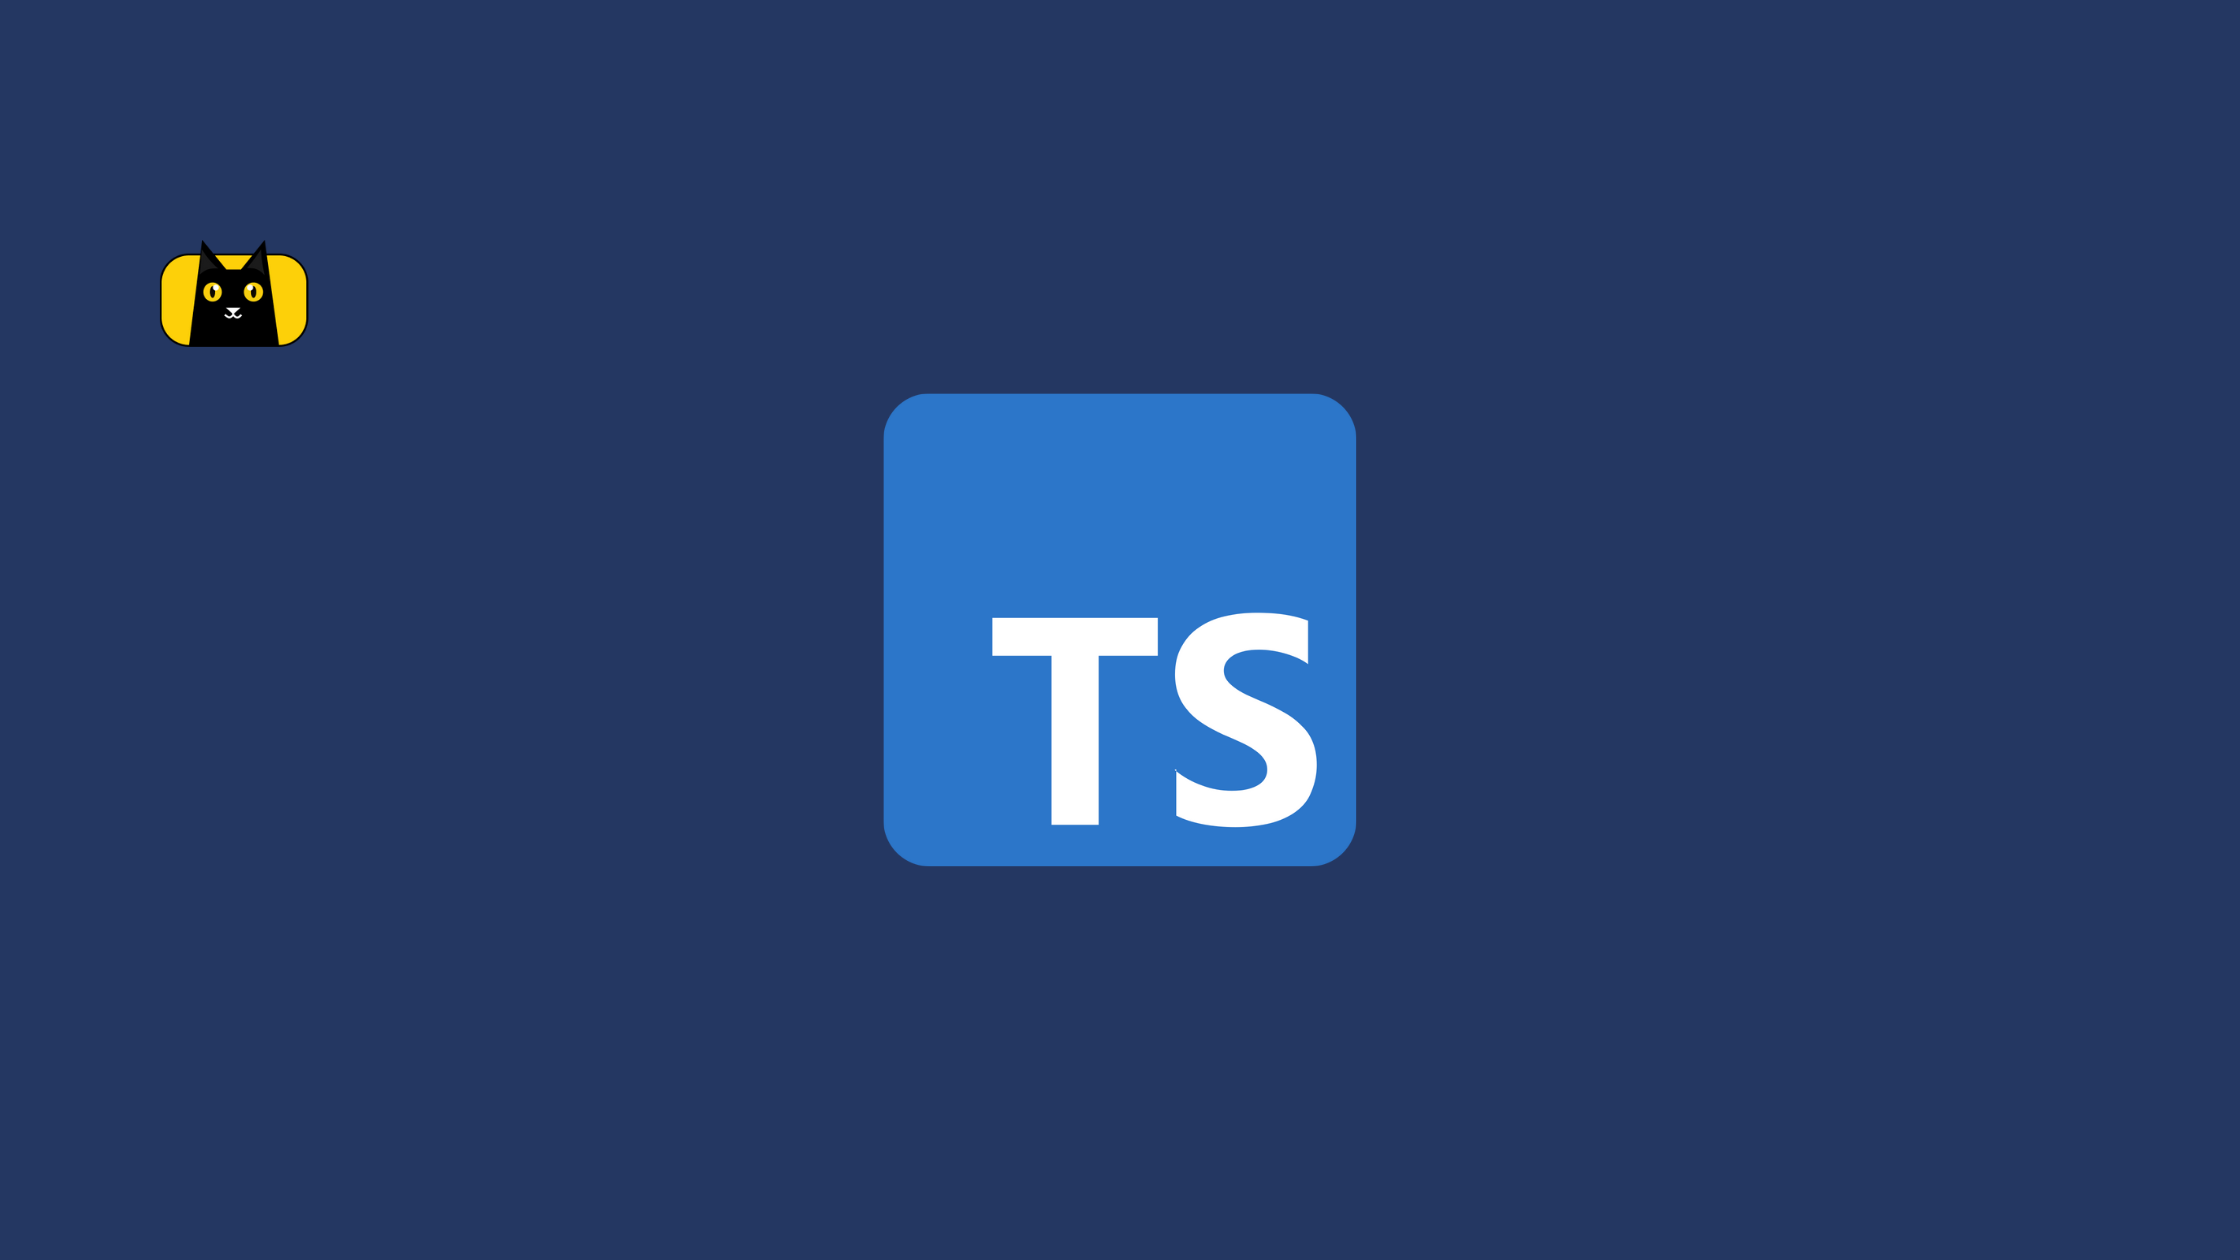 The Relevance of TypeScript in 2022